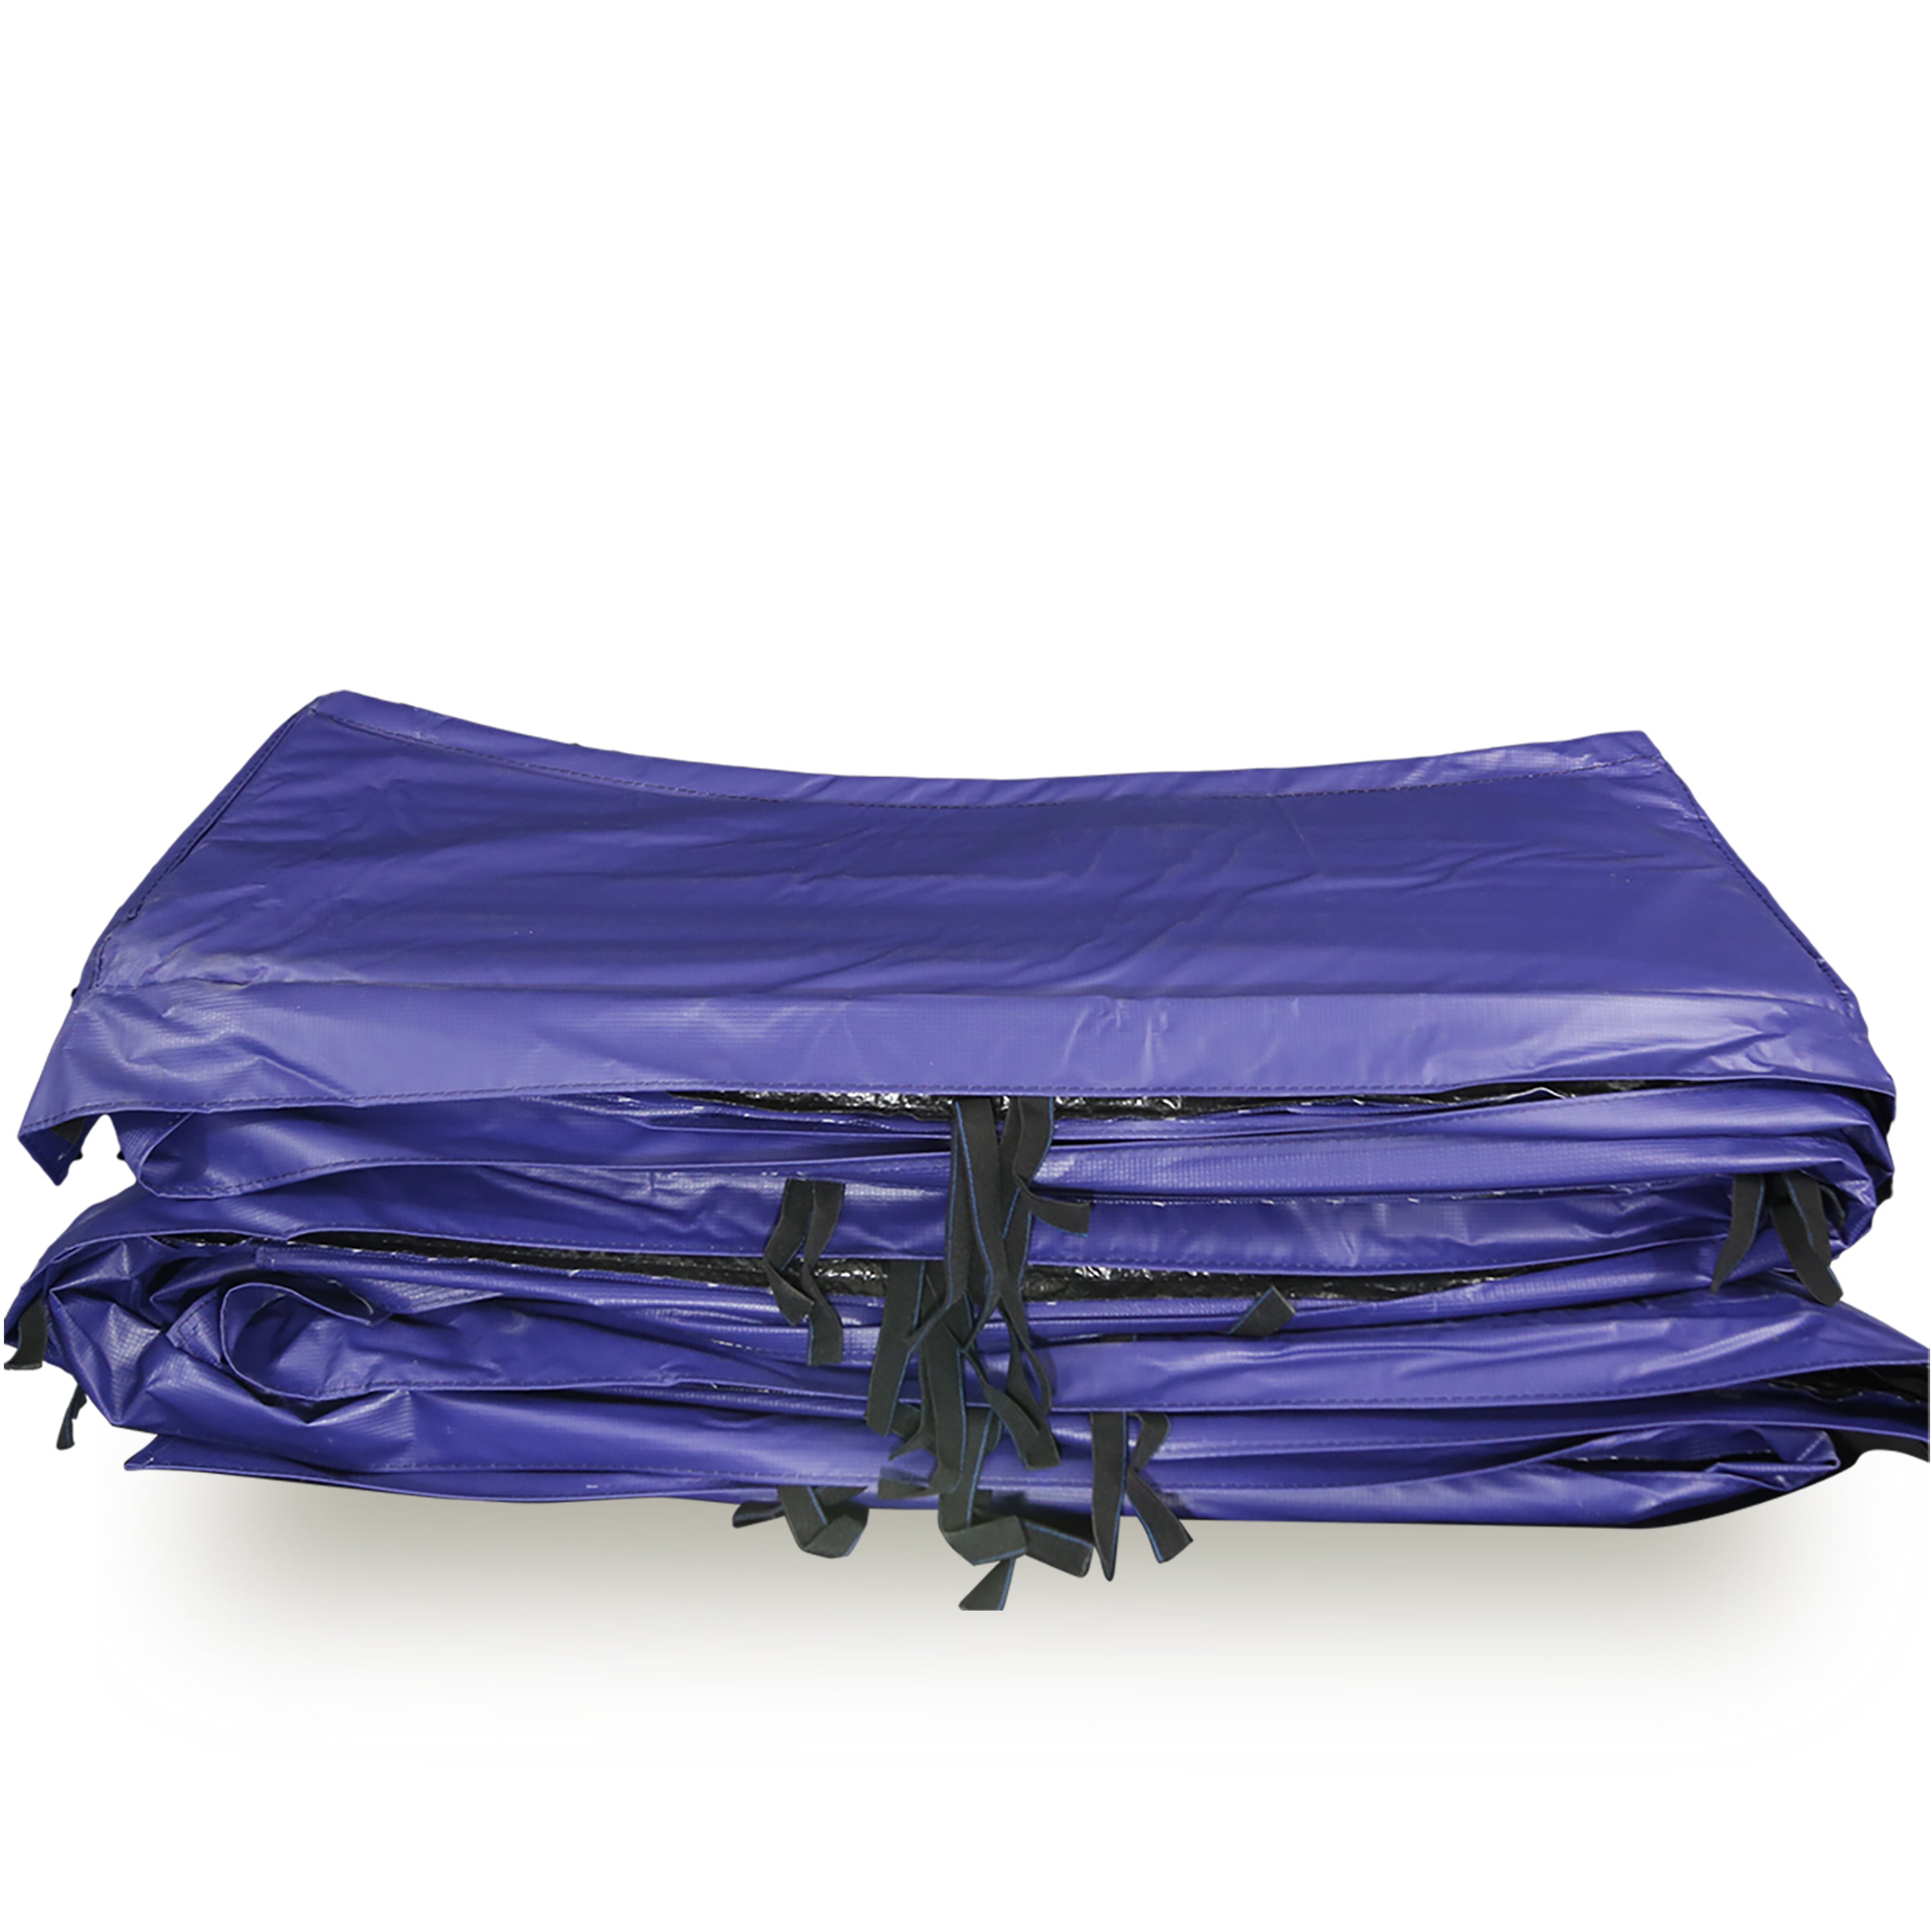 Folded UV-resistant spring pad designed for a 14-foot square trampoline. 